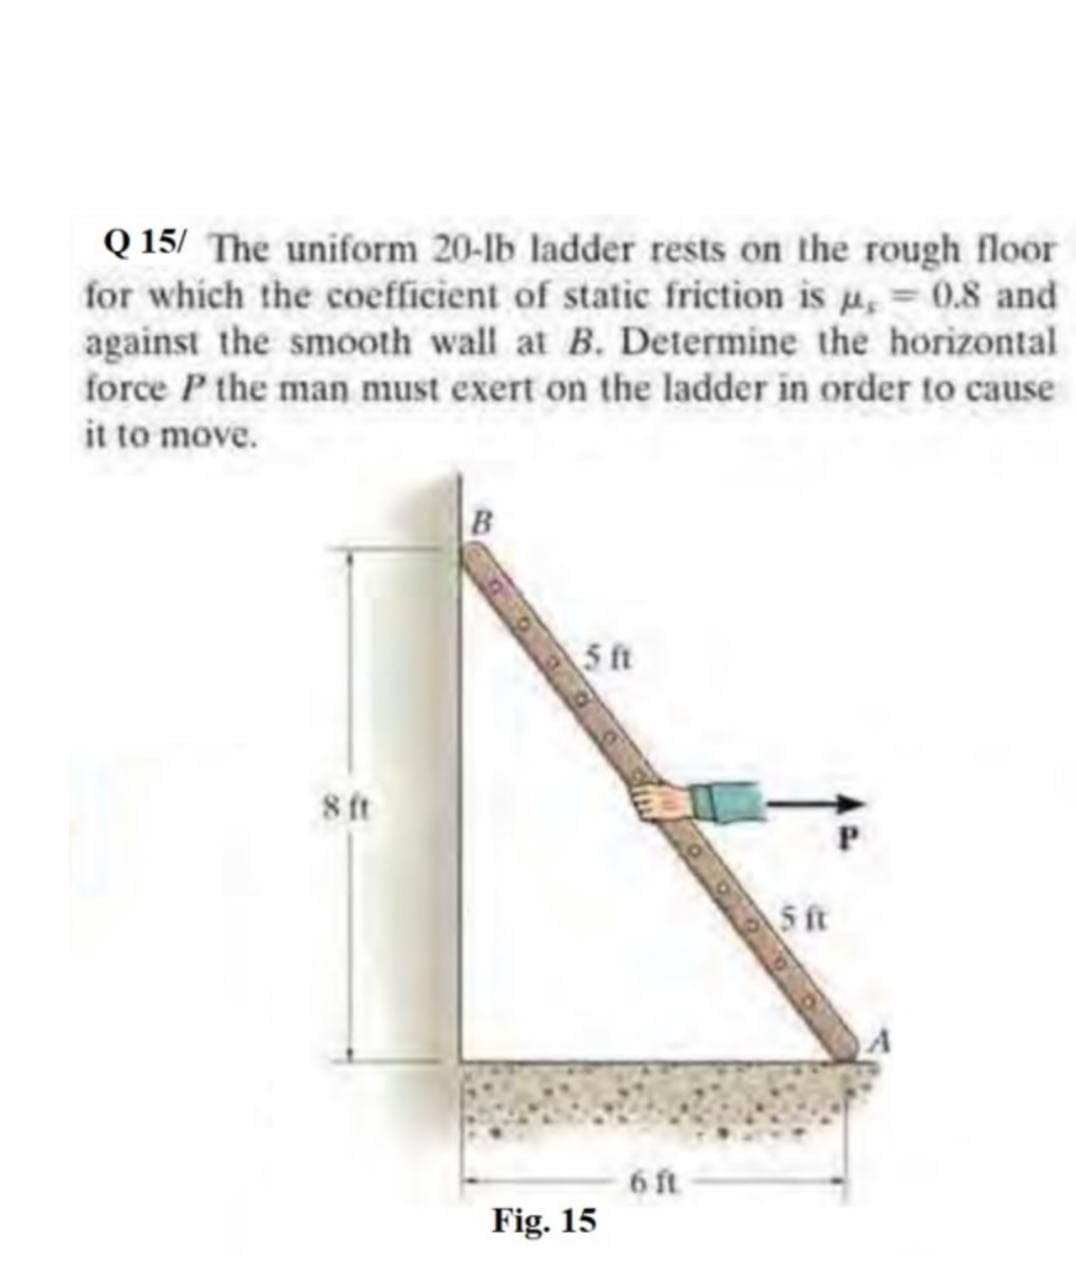 Q 15/ The uniform 20-lb ladder rests on the rough floor
for which the coefficient of static friction is u, 0.8 and
against the smooth wall at B. Determine the horizontal
force P the man must exert on the ladder in order to cause
it to move.
5 ft
8 ft
5 ft
6 ft
Fig. 15
